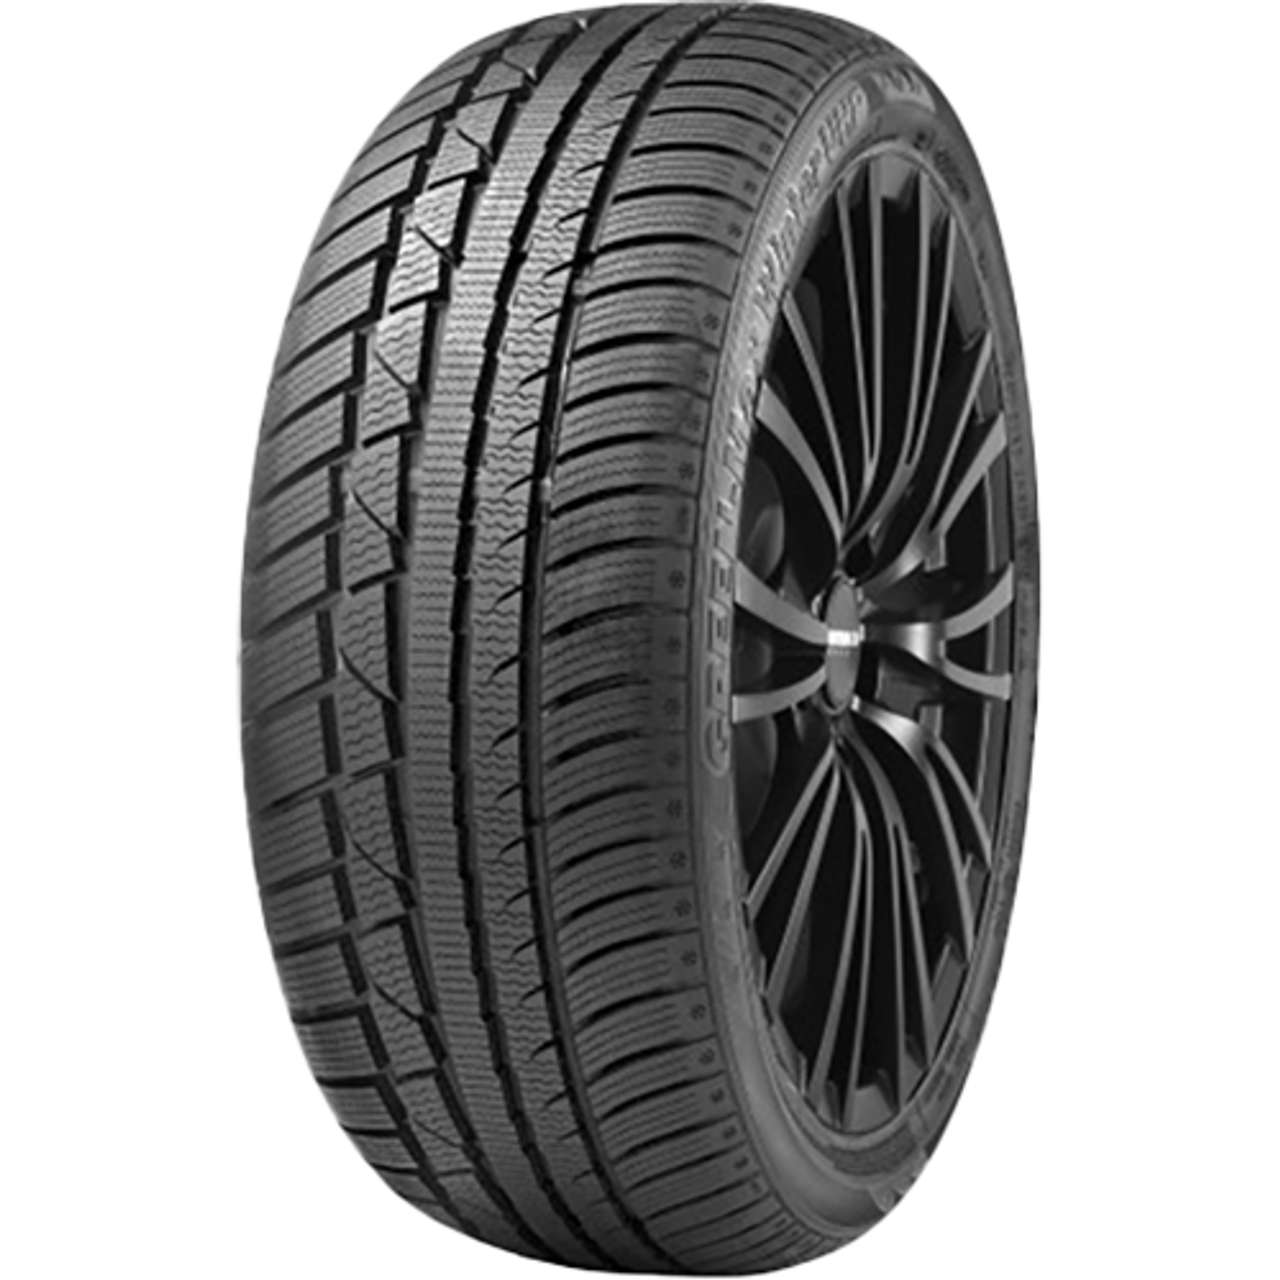 LINGLONG GREEN-MAX WINTER UHP 205/45R17 88V MFS BSW von LINGLONG